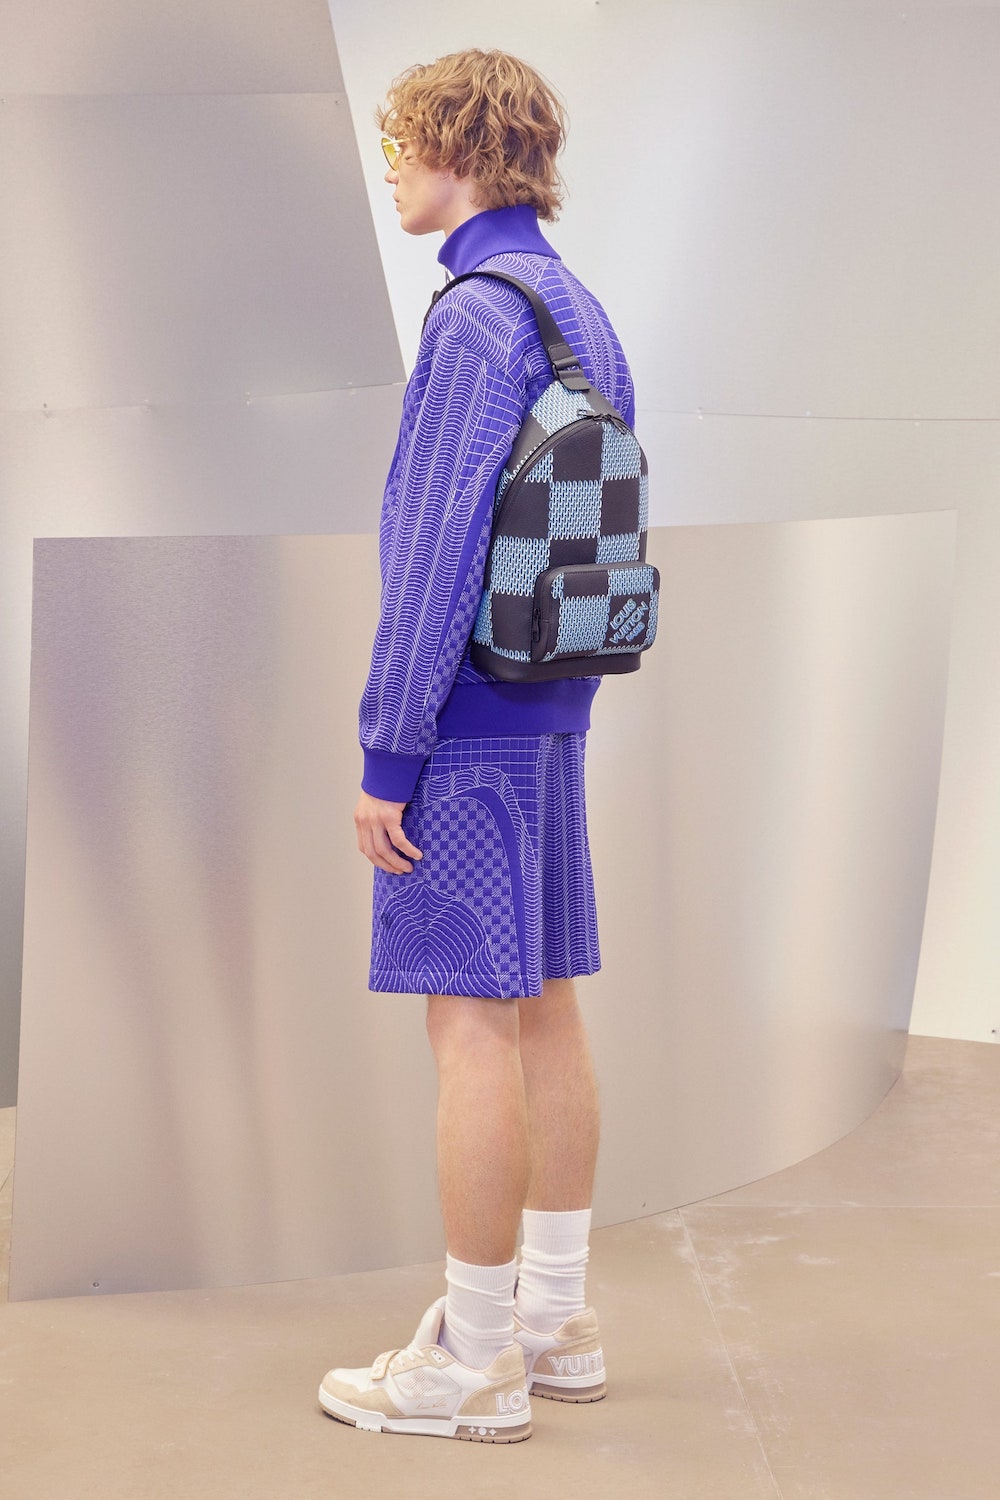 Louis Vuitton Debut Pre-Fall 2022 “Daybreak” Collection – PAUSE Online